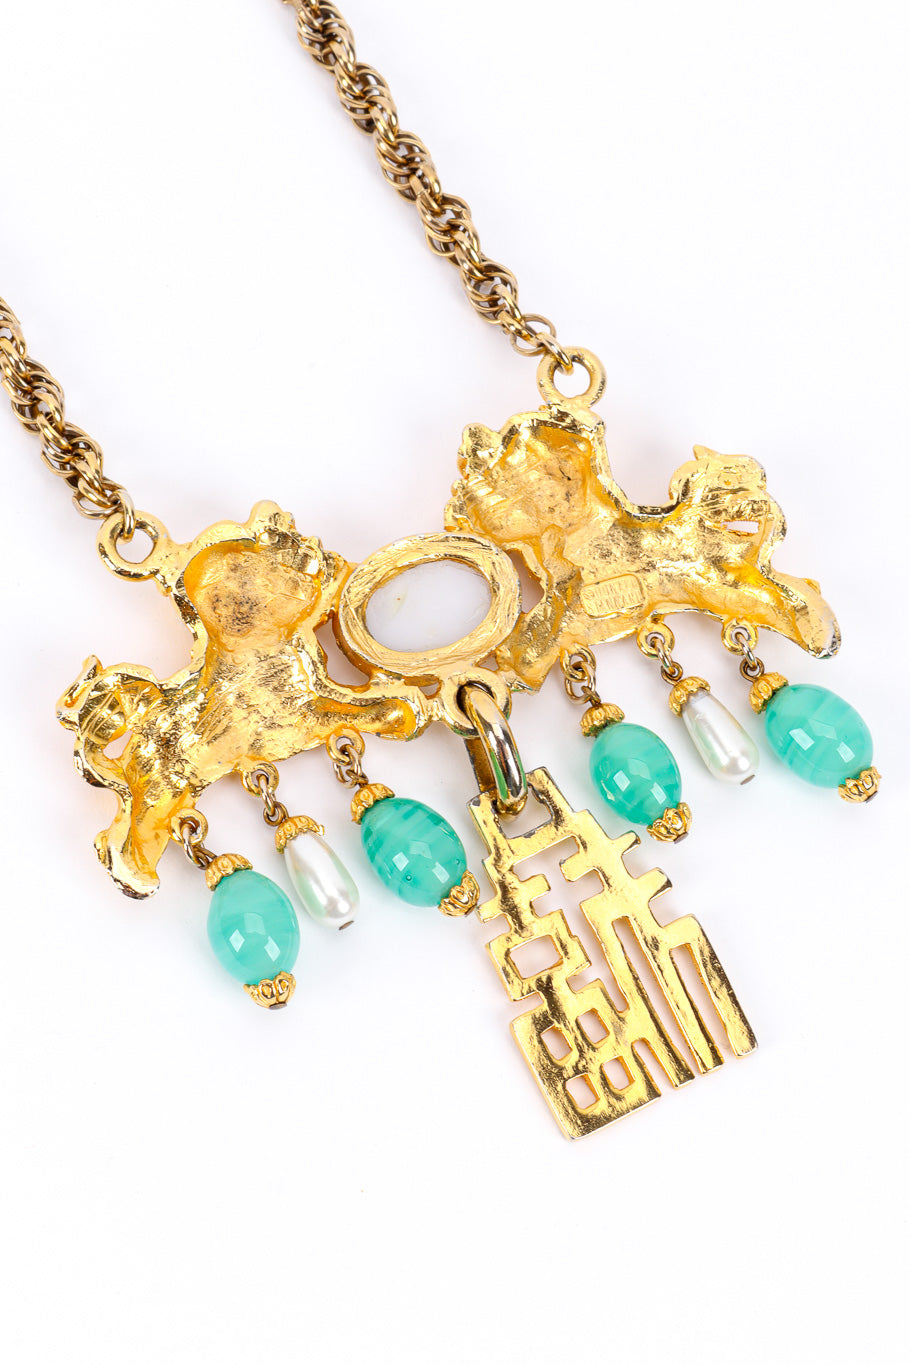 Foo Dog Palace Necklace by Donald Stannard back of plate @recessla